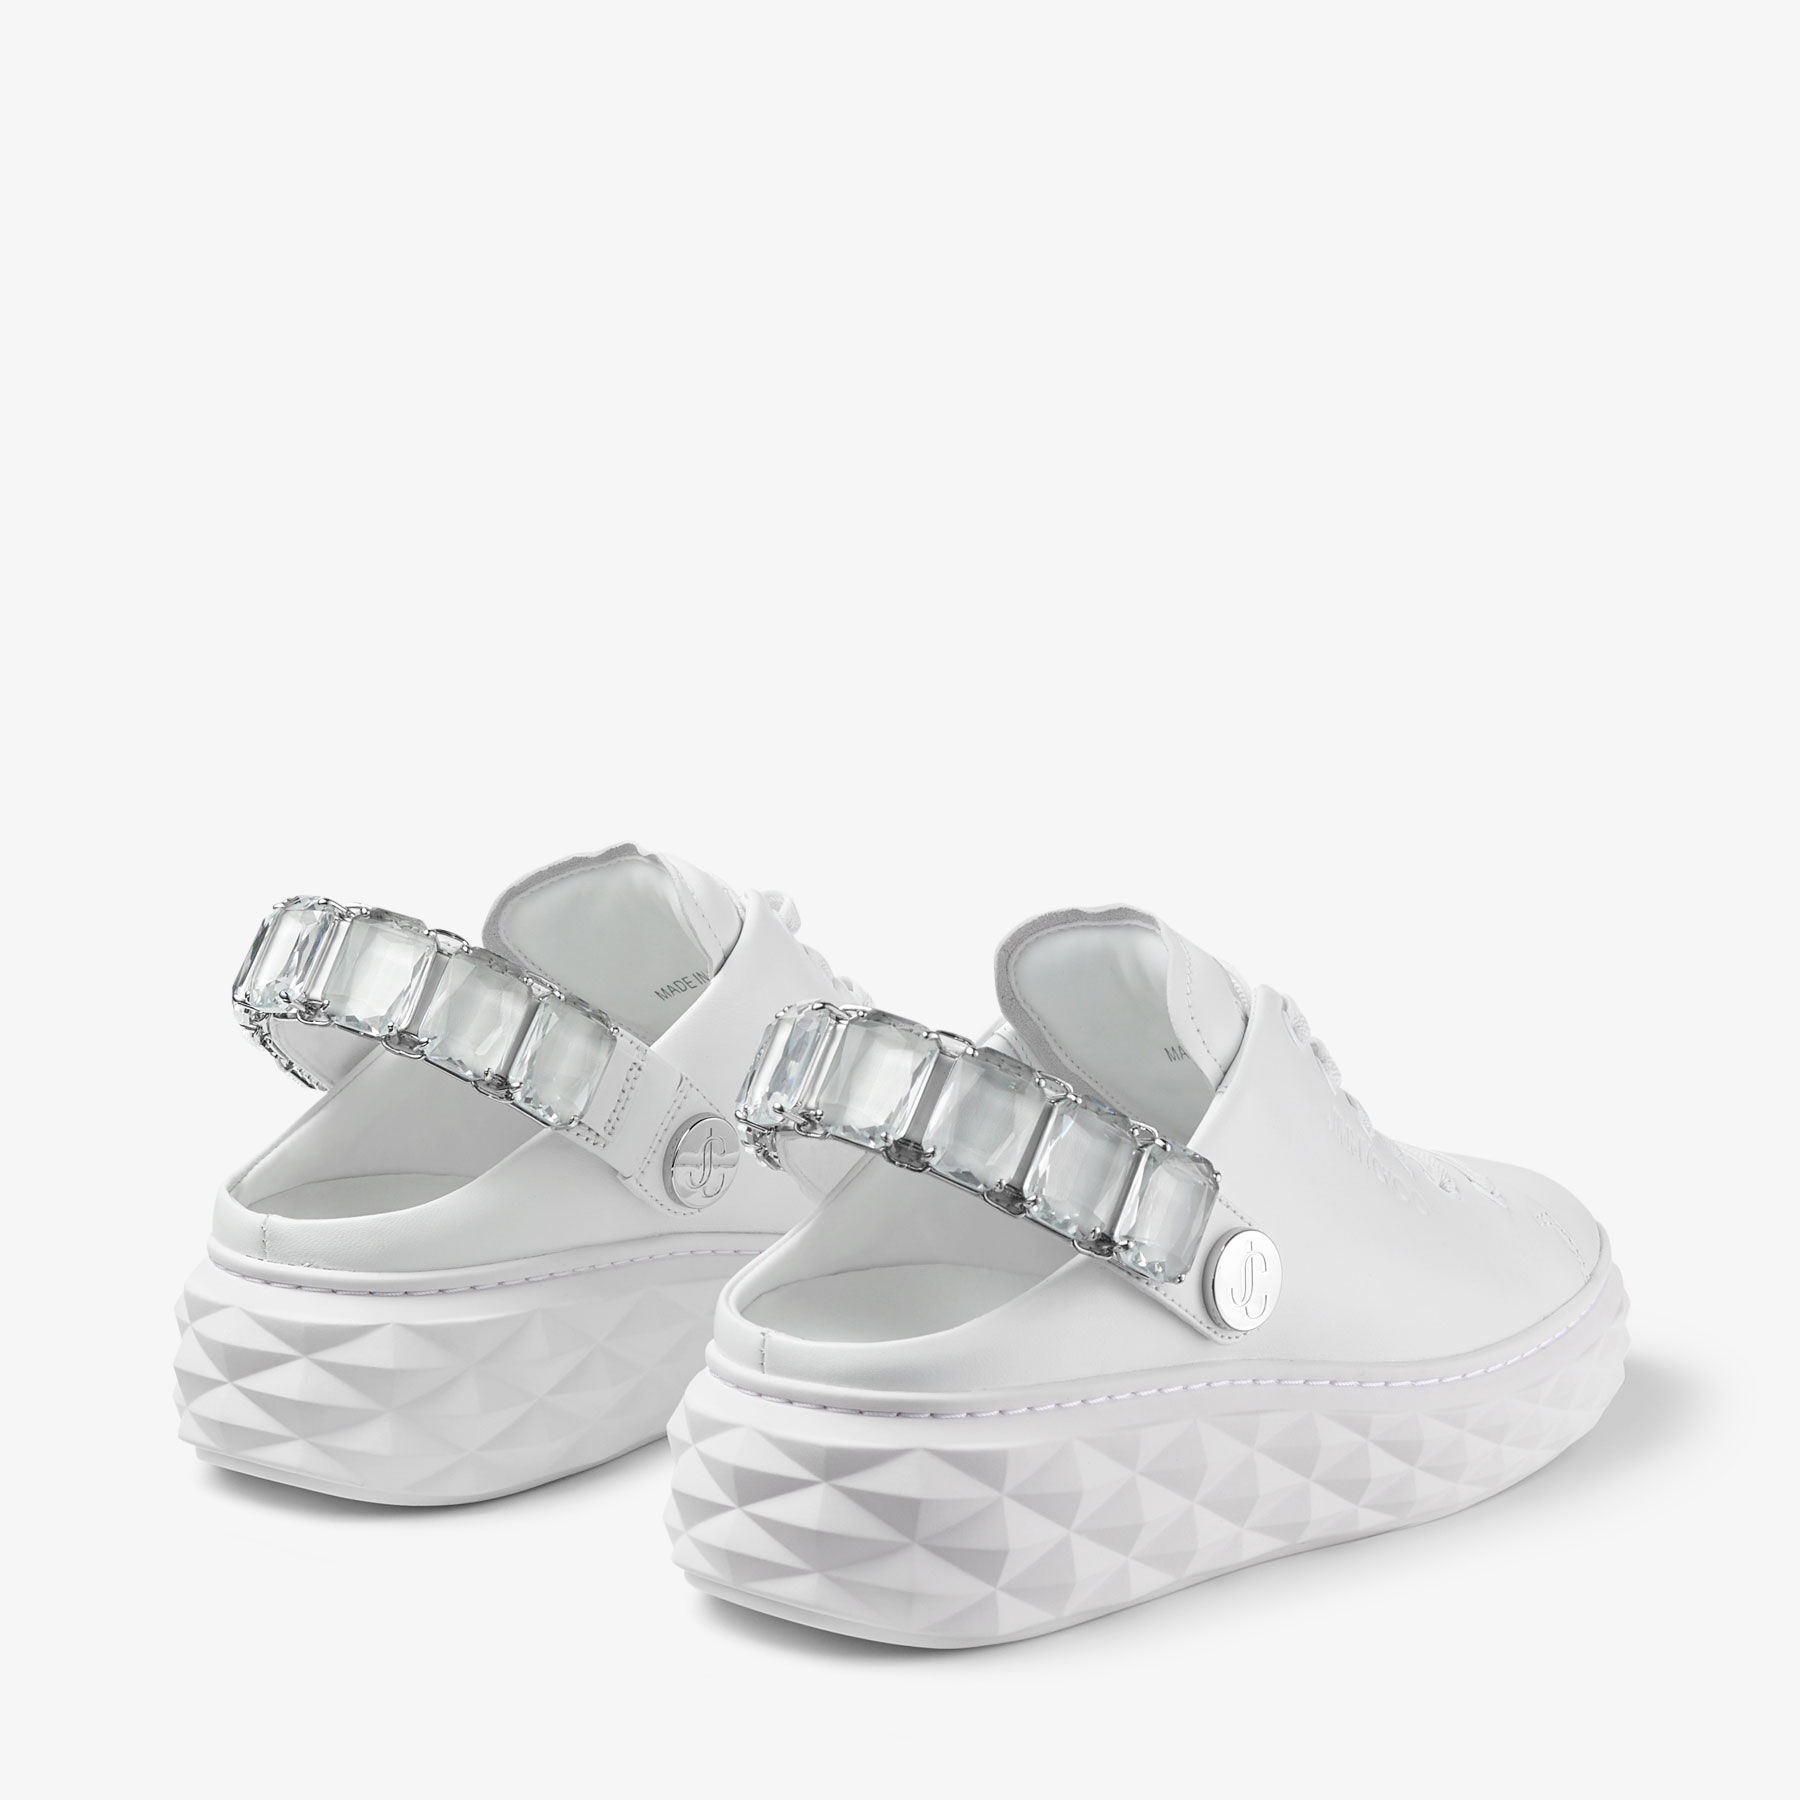 Diamond Maxi Crystal
White Nappa Leather Slipper Trainers with Crystal Strap - 6